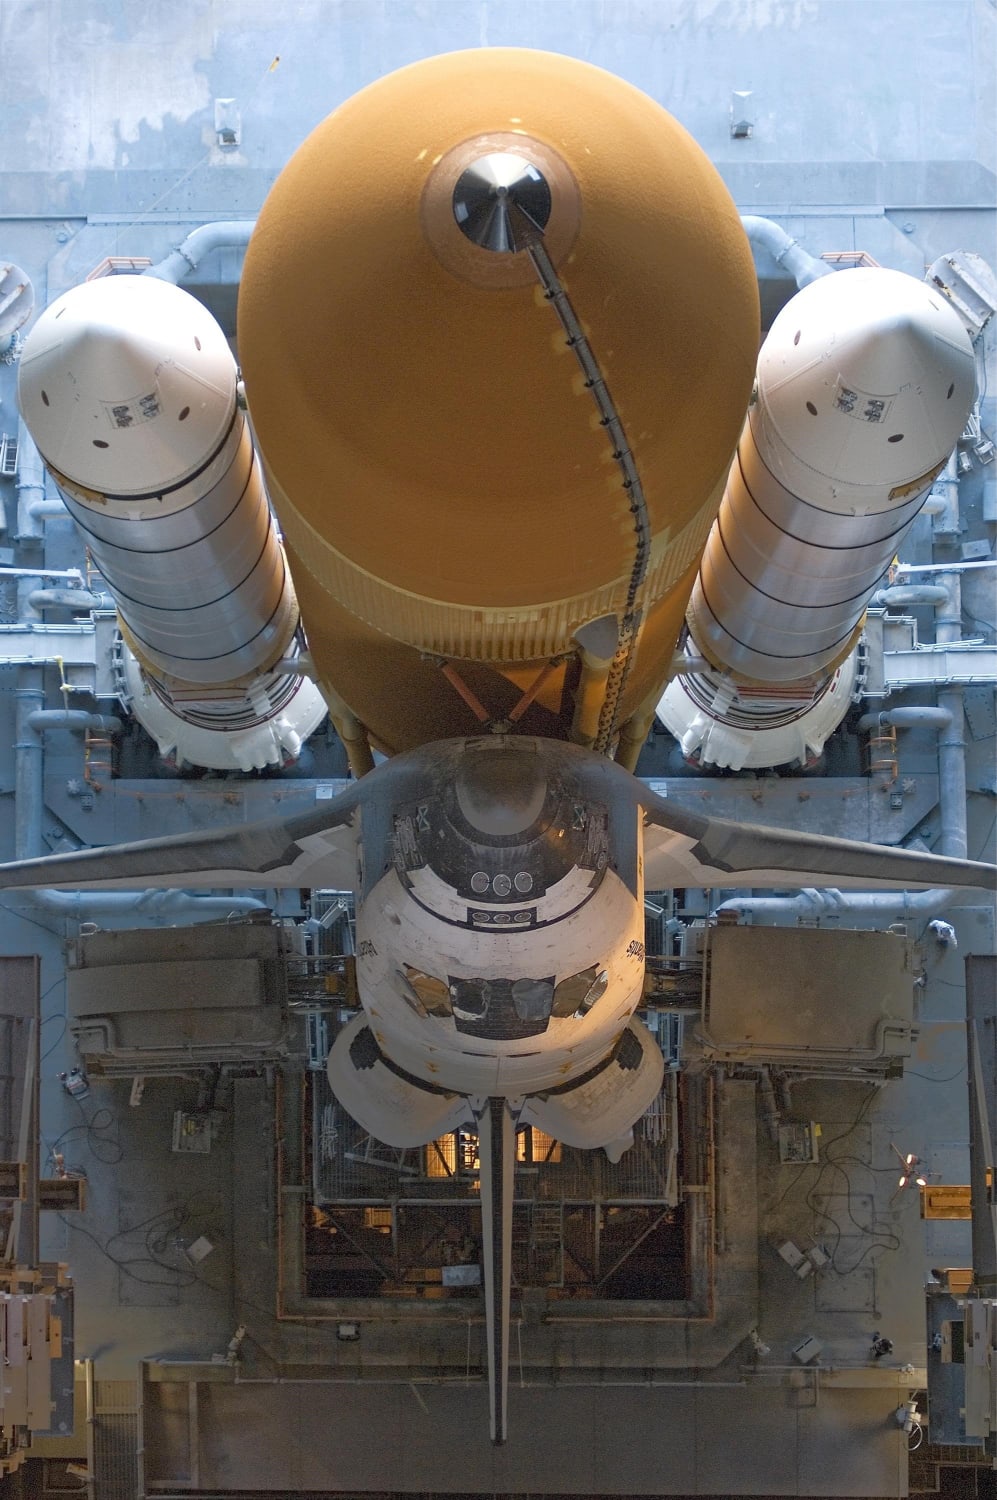 NASA's Space Shuttle Atlantis (STS-117) "rolls back into high bay 1 of the Vehicle Assembly Building from Launch Pad 39A" in 2007 at the NASA John F. Kennedy Space Center in Florida, United States of America. Photographer: Jeff Wolfe, National Aeronautics and Space Administration (NASA)